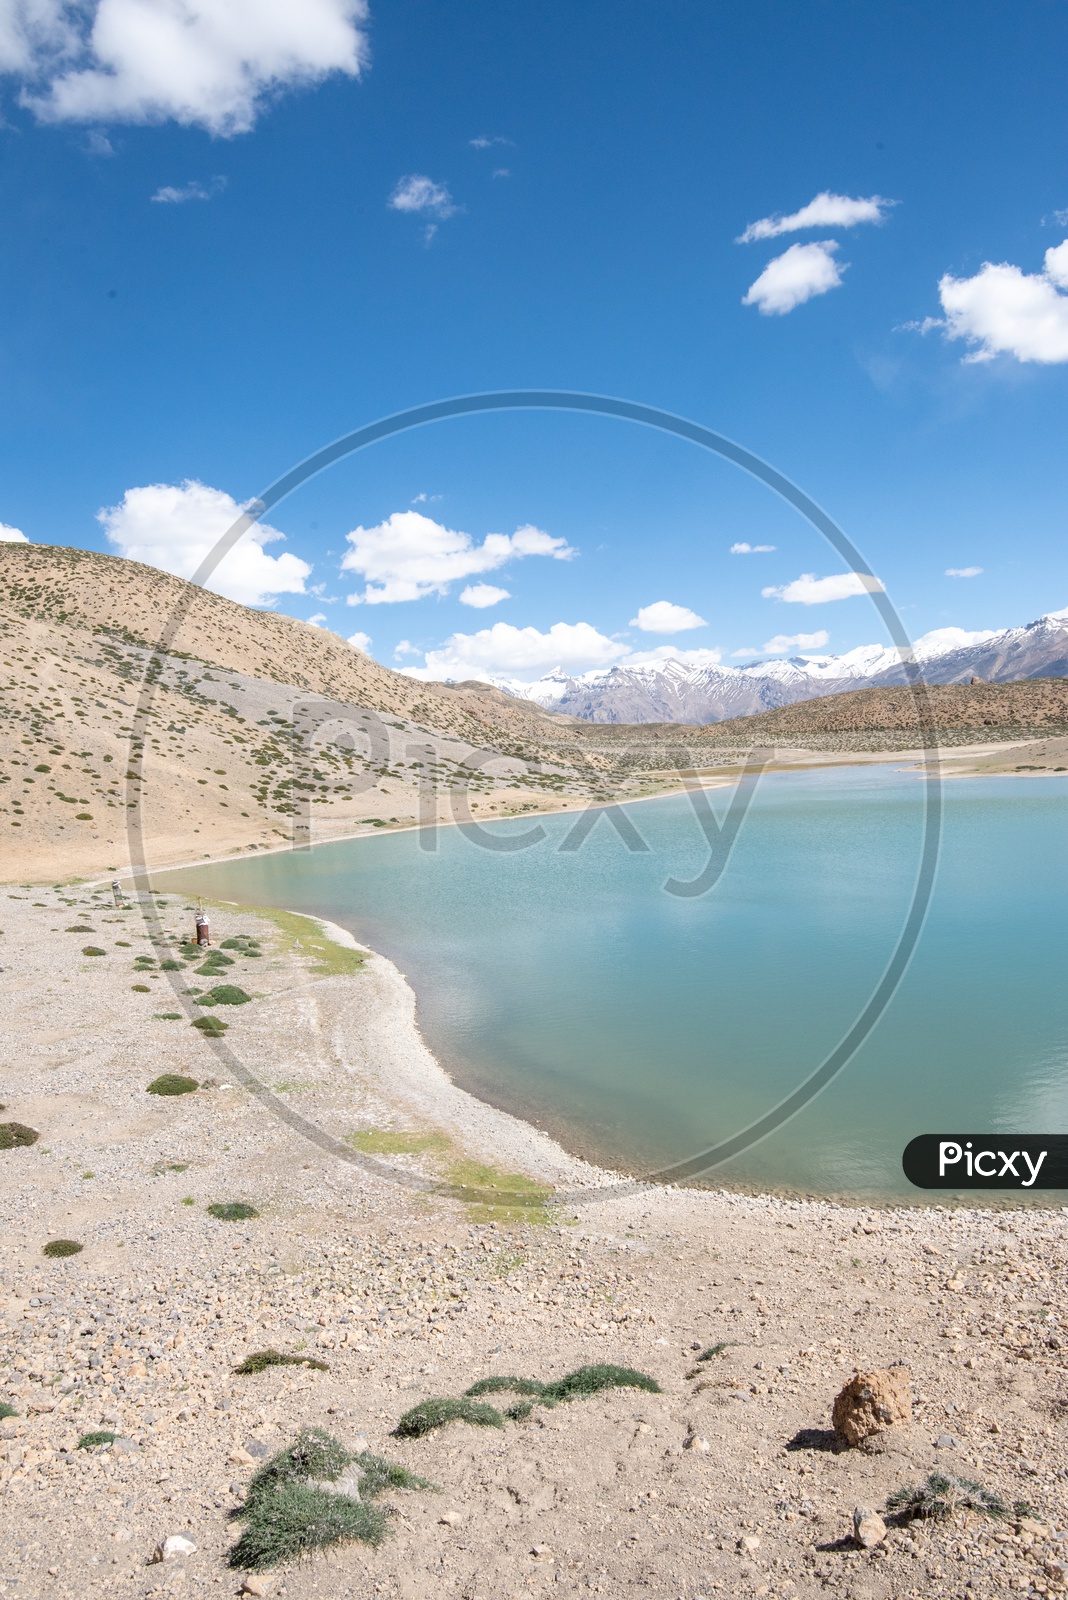 Dhankar lake with mountain peaks in the background in Spiti Valley